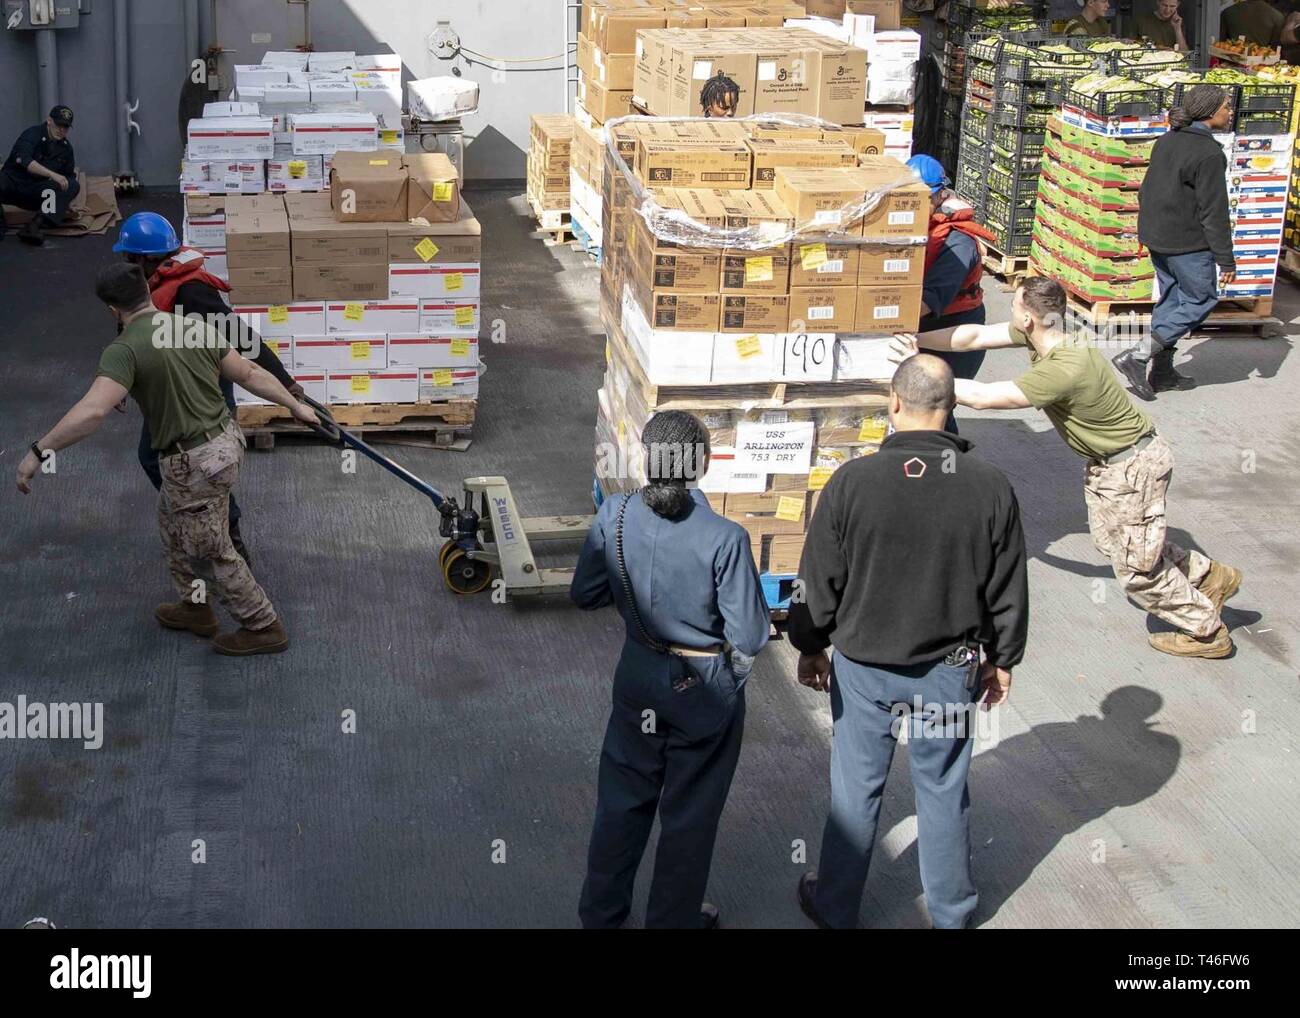 MEDITERRANEAN SEA (Mar. 9, 2019) - U.S. Marines and Sailors with the 22nd Marine Expeditionary Unit and the San Antonio-class amphibious transport dock ship USS Arlington (LPD-24) help each other move pallets of stores across the boat valley of the Arlington during a replenishment-at-sea, Mar. 9, 2019. The USS Arlington is making a scheduled deployment as part of the 22nd MEU and the Kearsarge Amphibious Ready Group, in support of maritime security operations, crisis response and theater security cooperation, while also providing a forward Naval and Marine presence. Stock Photo